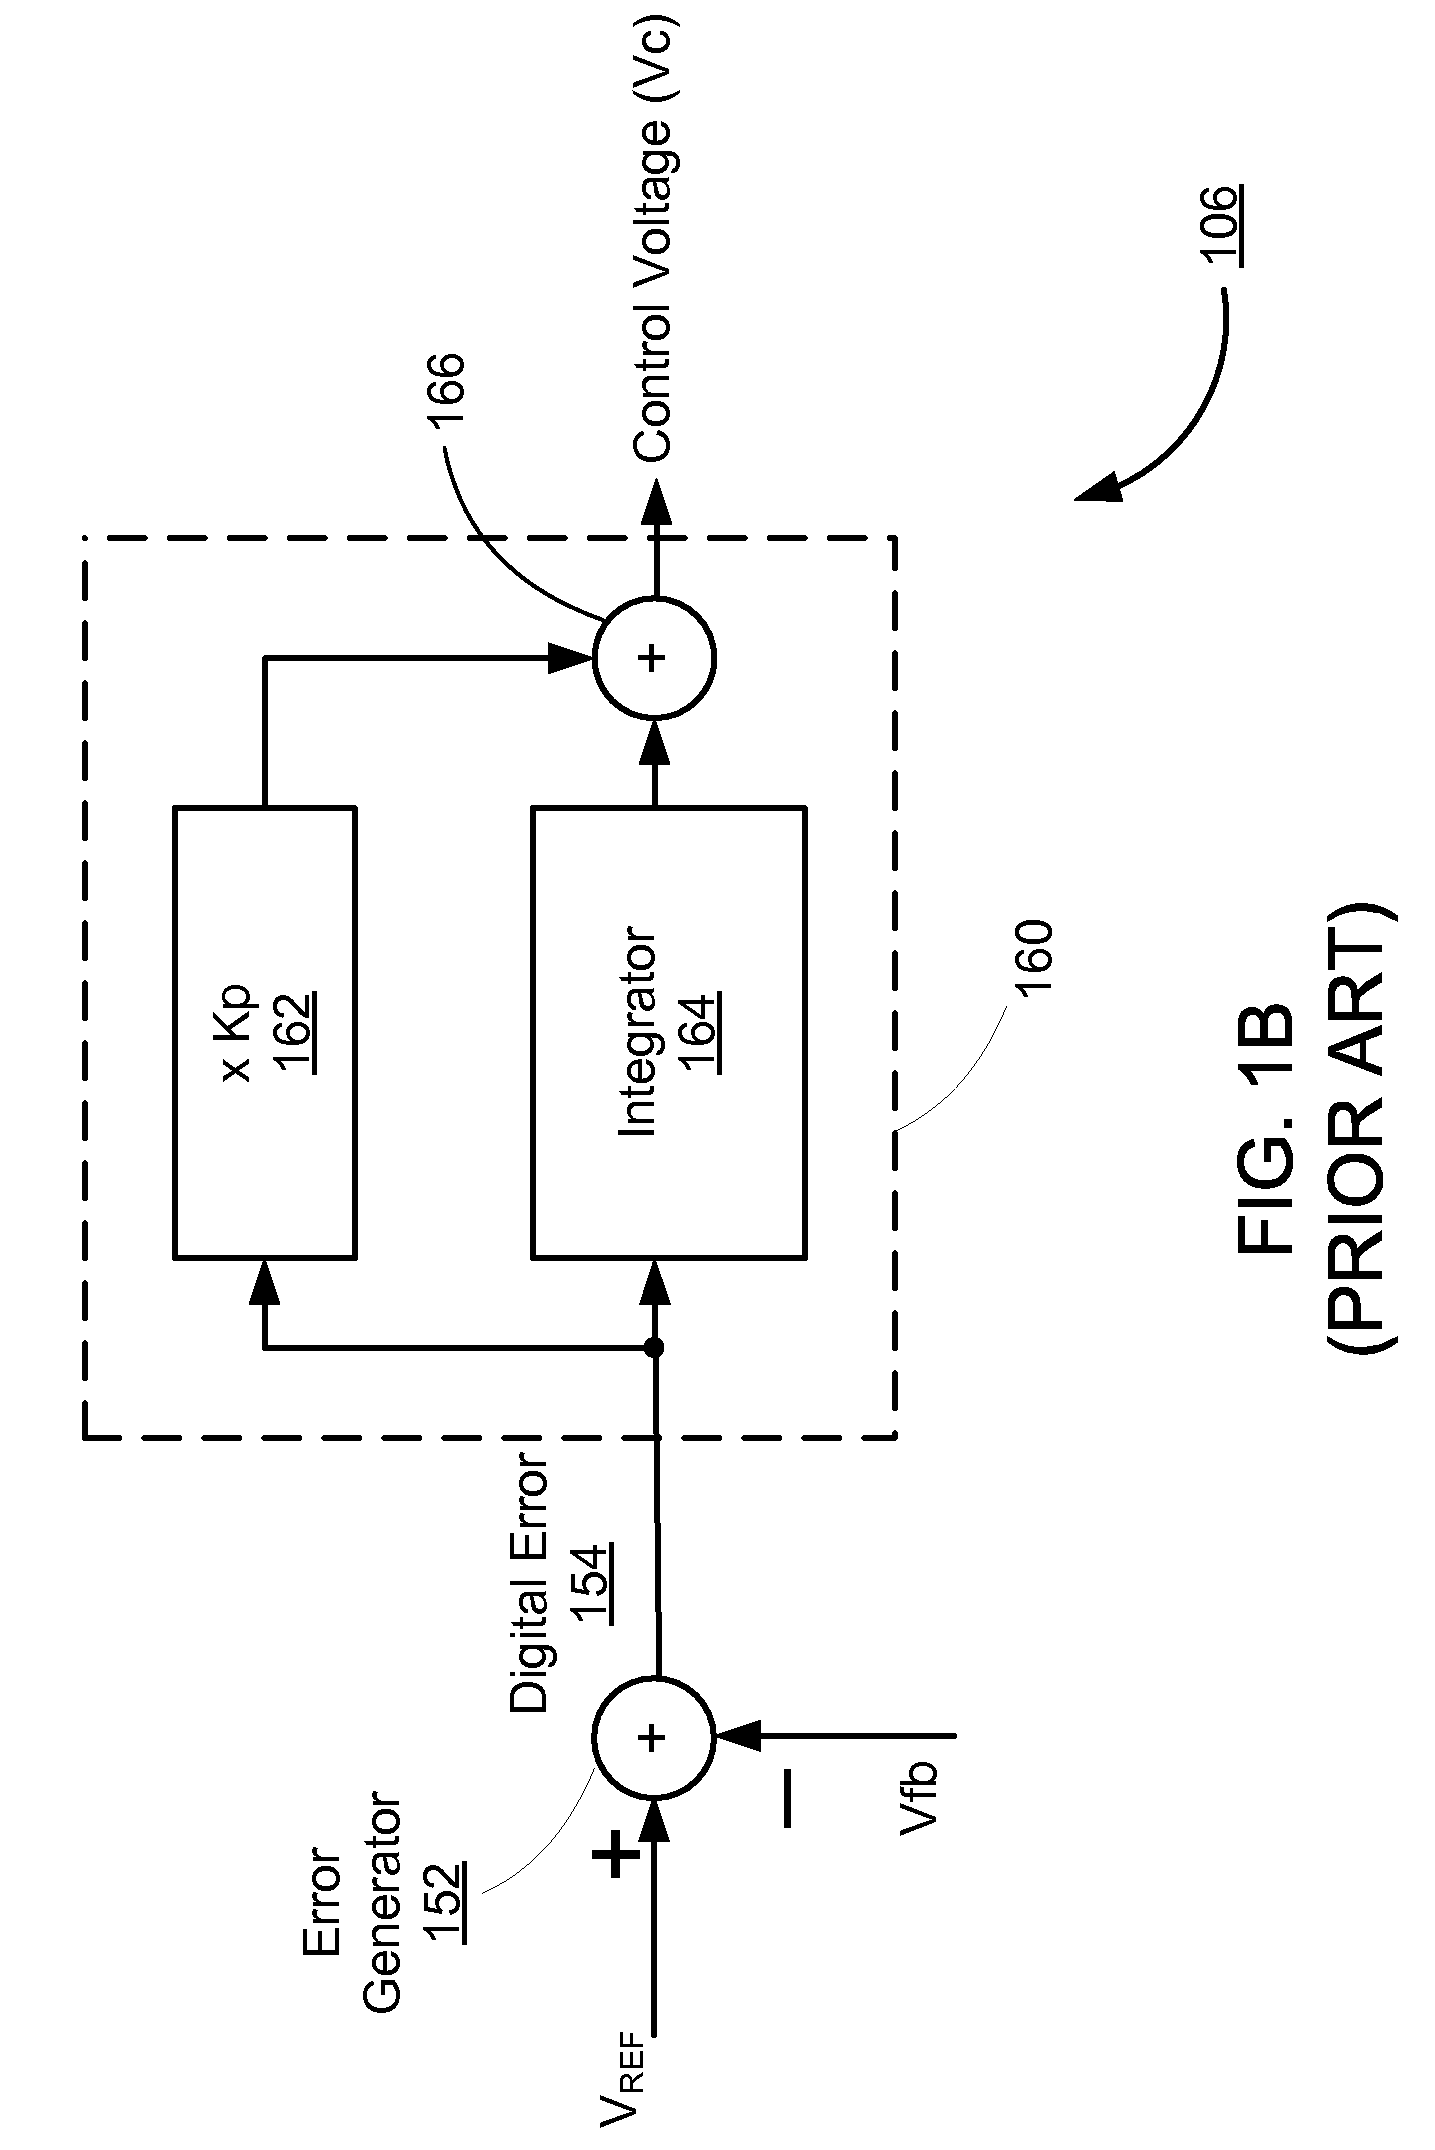 Detecting Light Load Conditions and Improving Light Load Efficiency in a Switching Power Converter